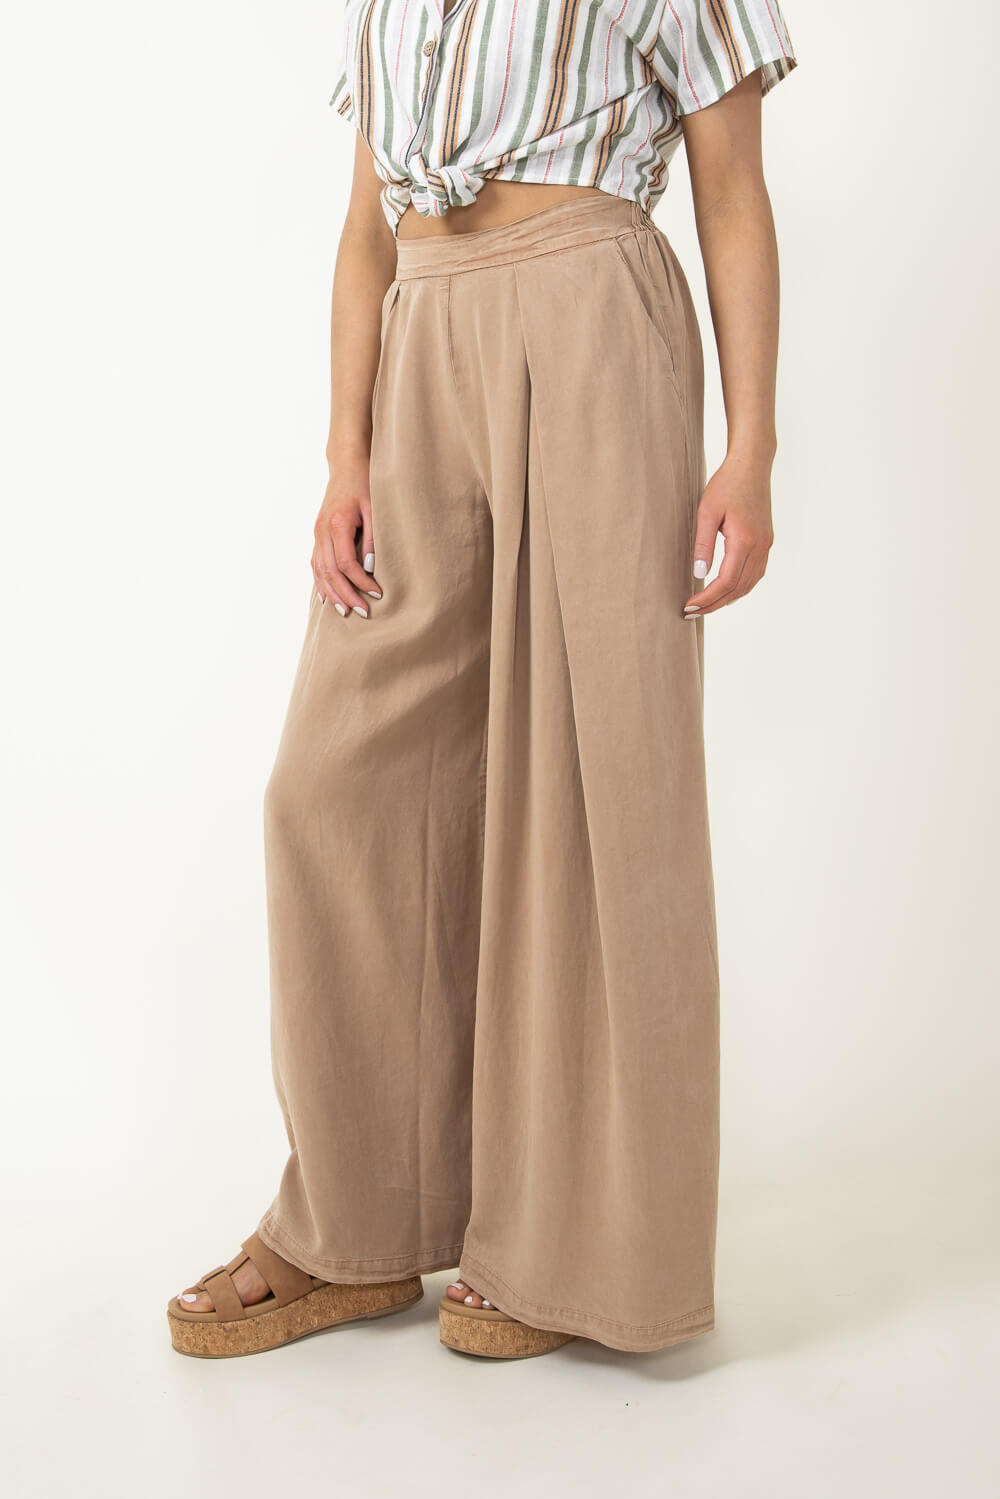 Wide-leg trousers: tan, beige and neutral shade pairs to wear now